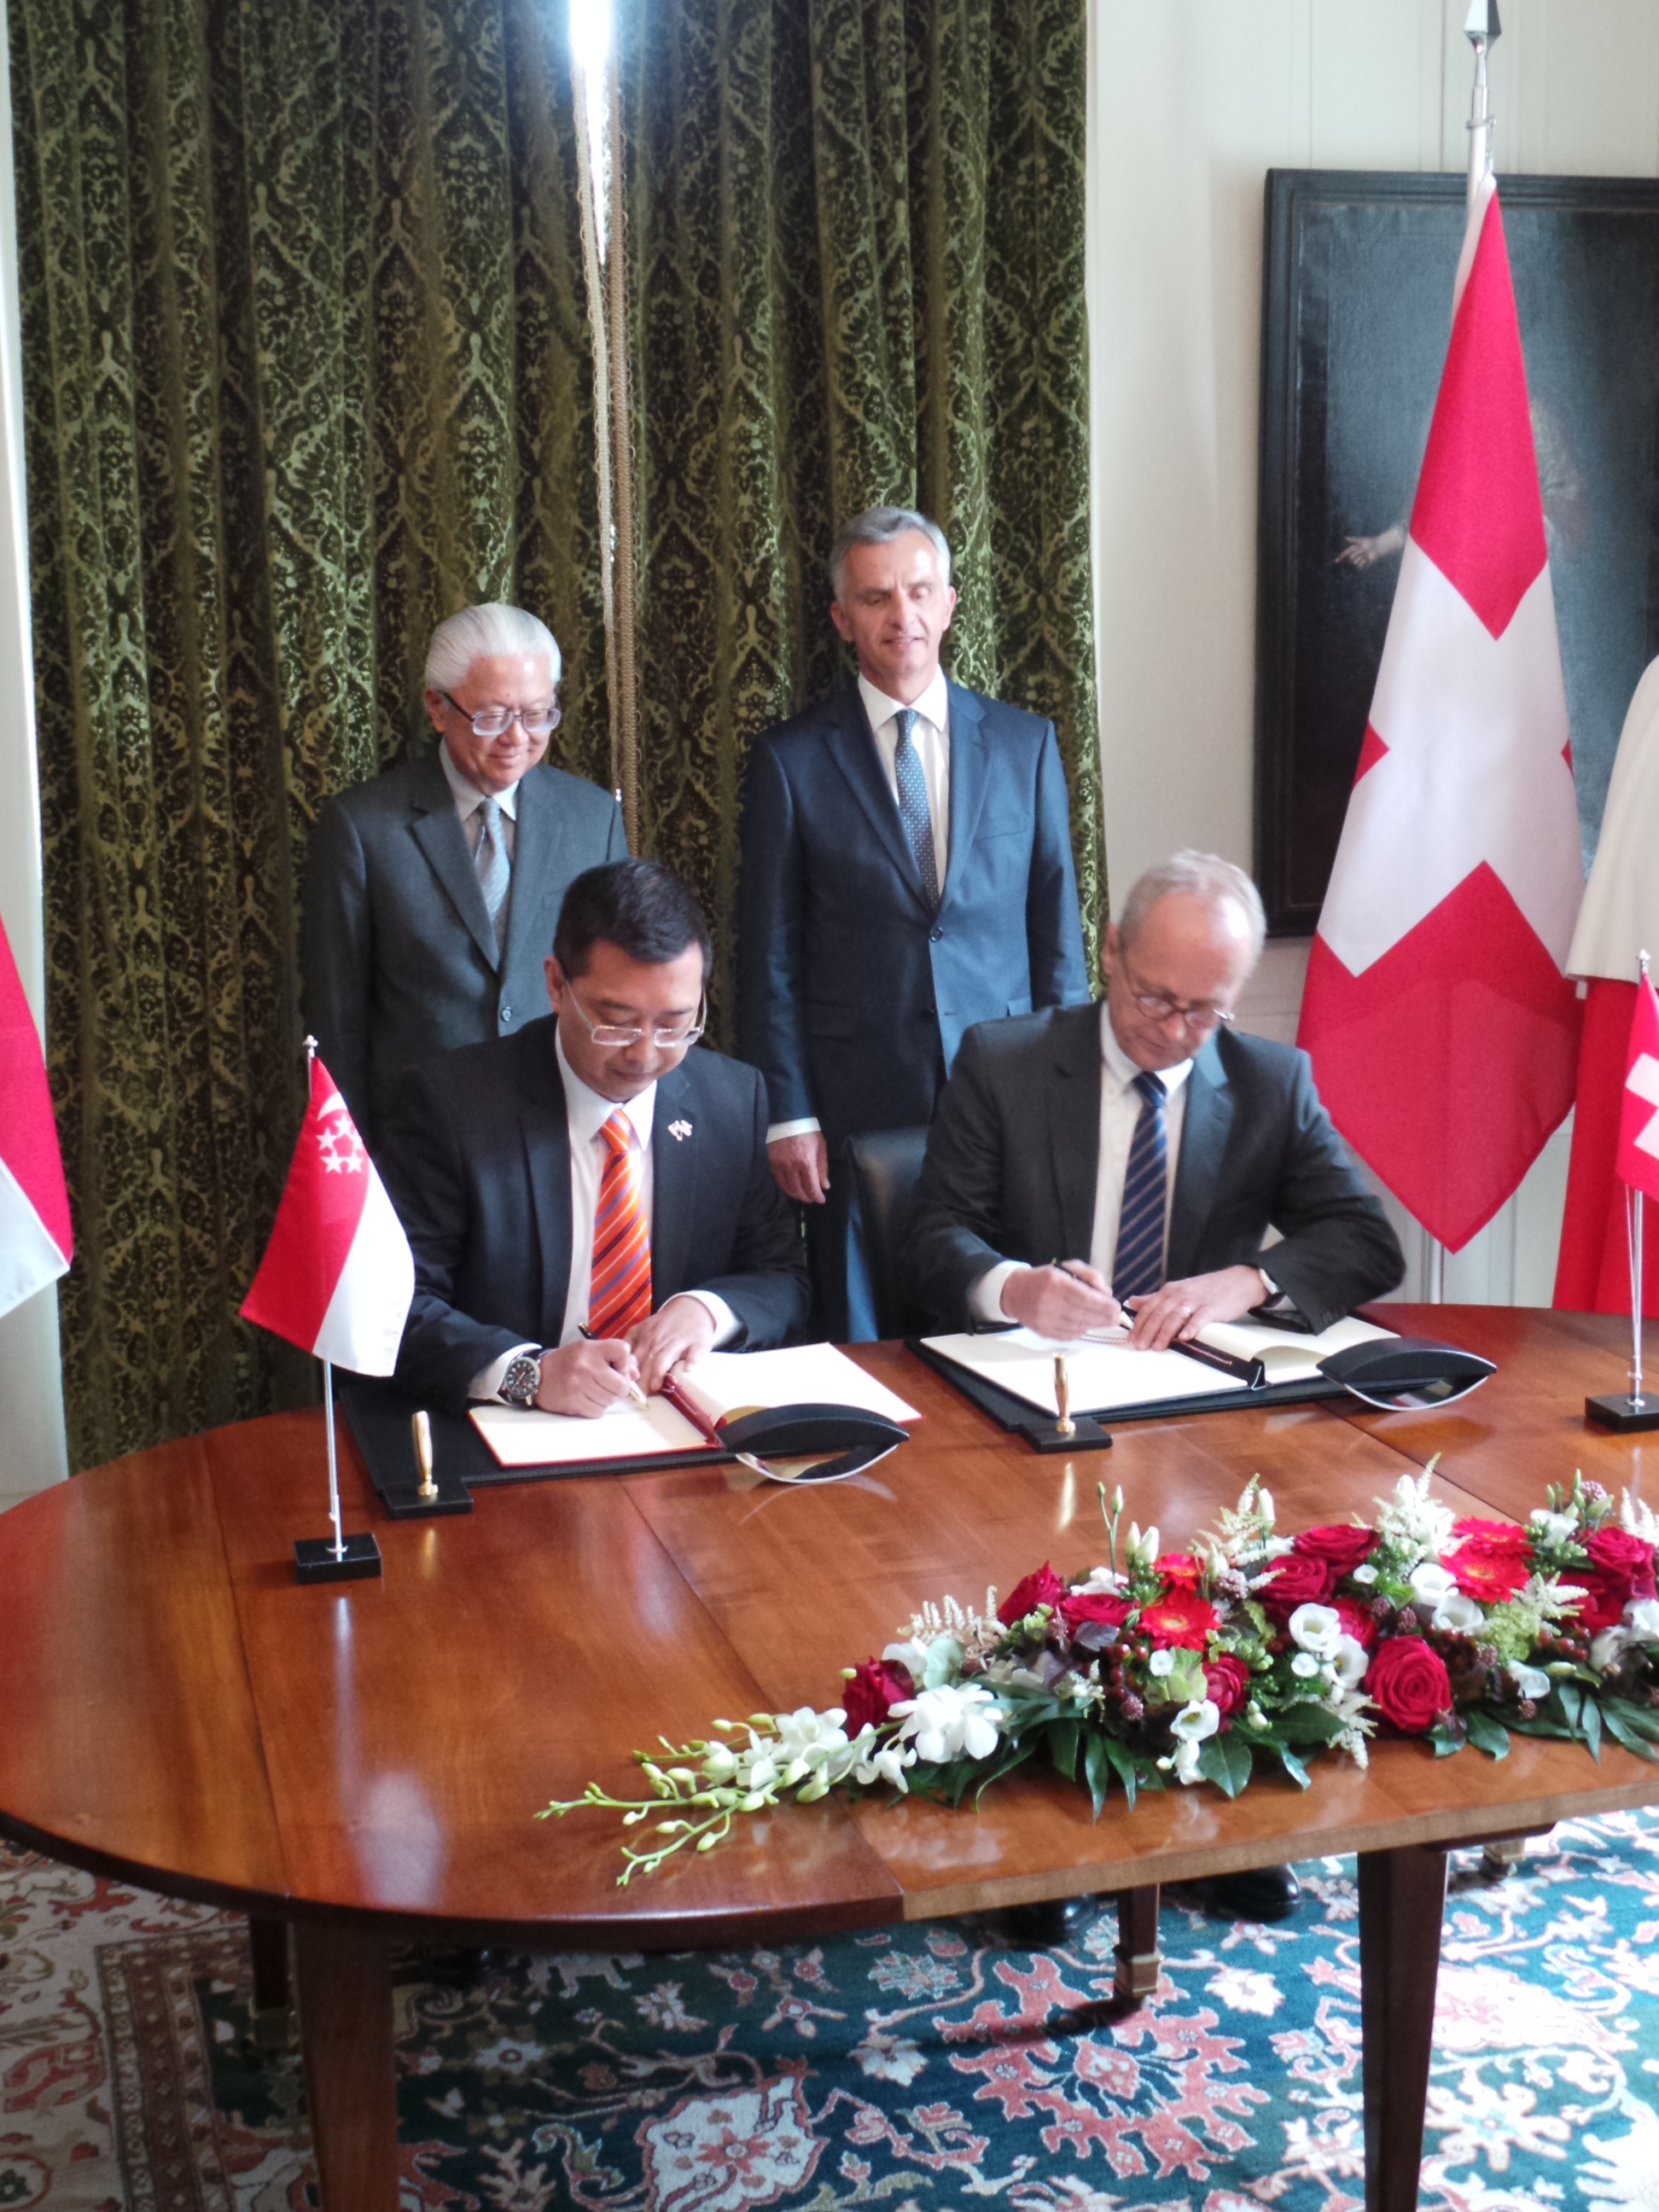 The deputy state secretary, Beat Nobs, and Simon Wong sign the declaration on deepening the partnership, while the President of the Swiss Confederation, Didier Burkhalter, and the President of the Republic of Singapore, Tony TAN Keng Yam, look on.